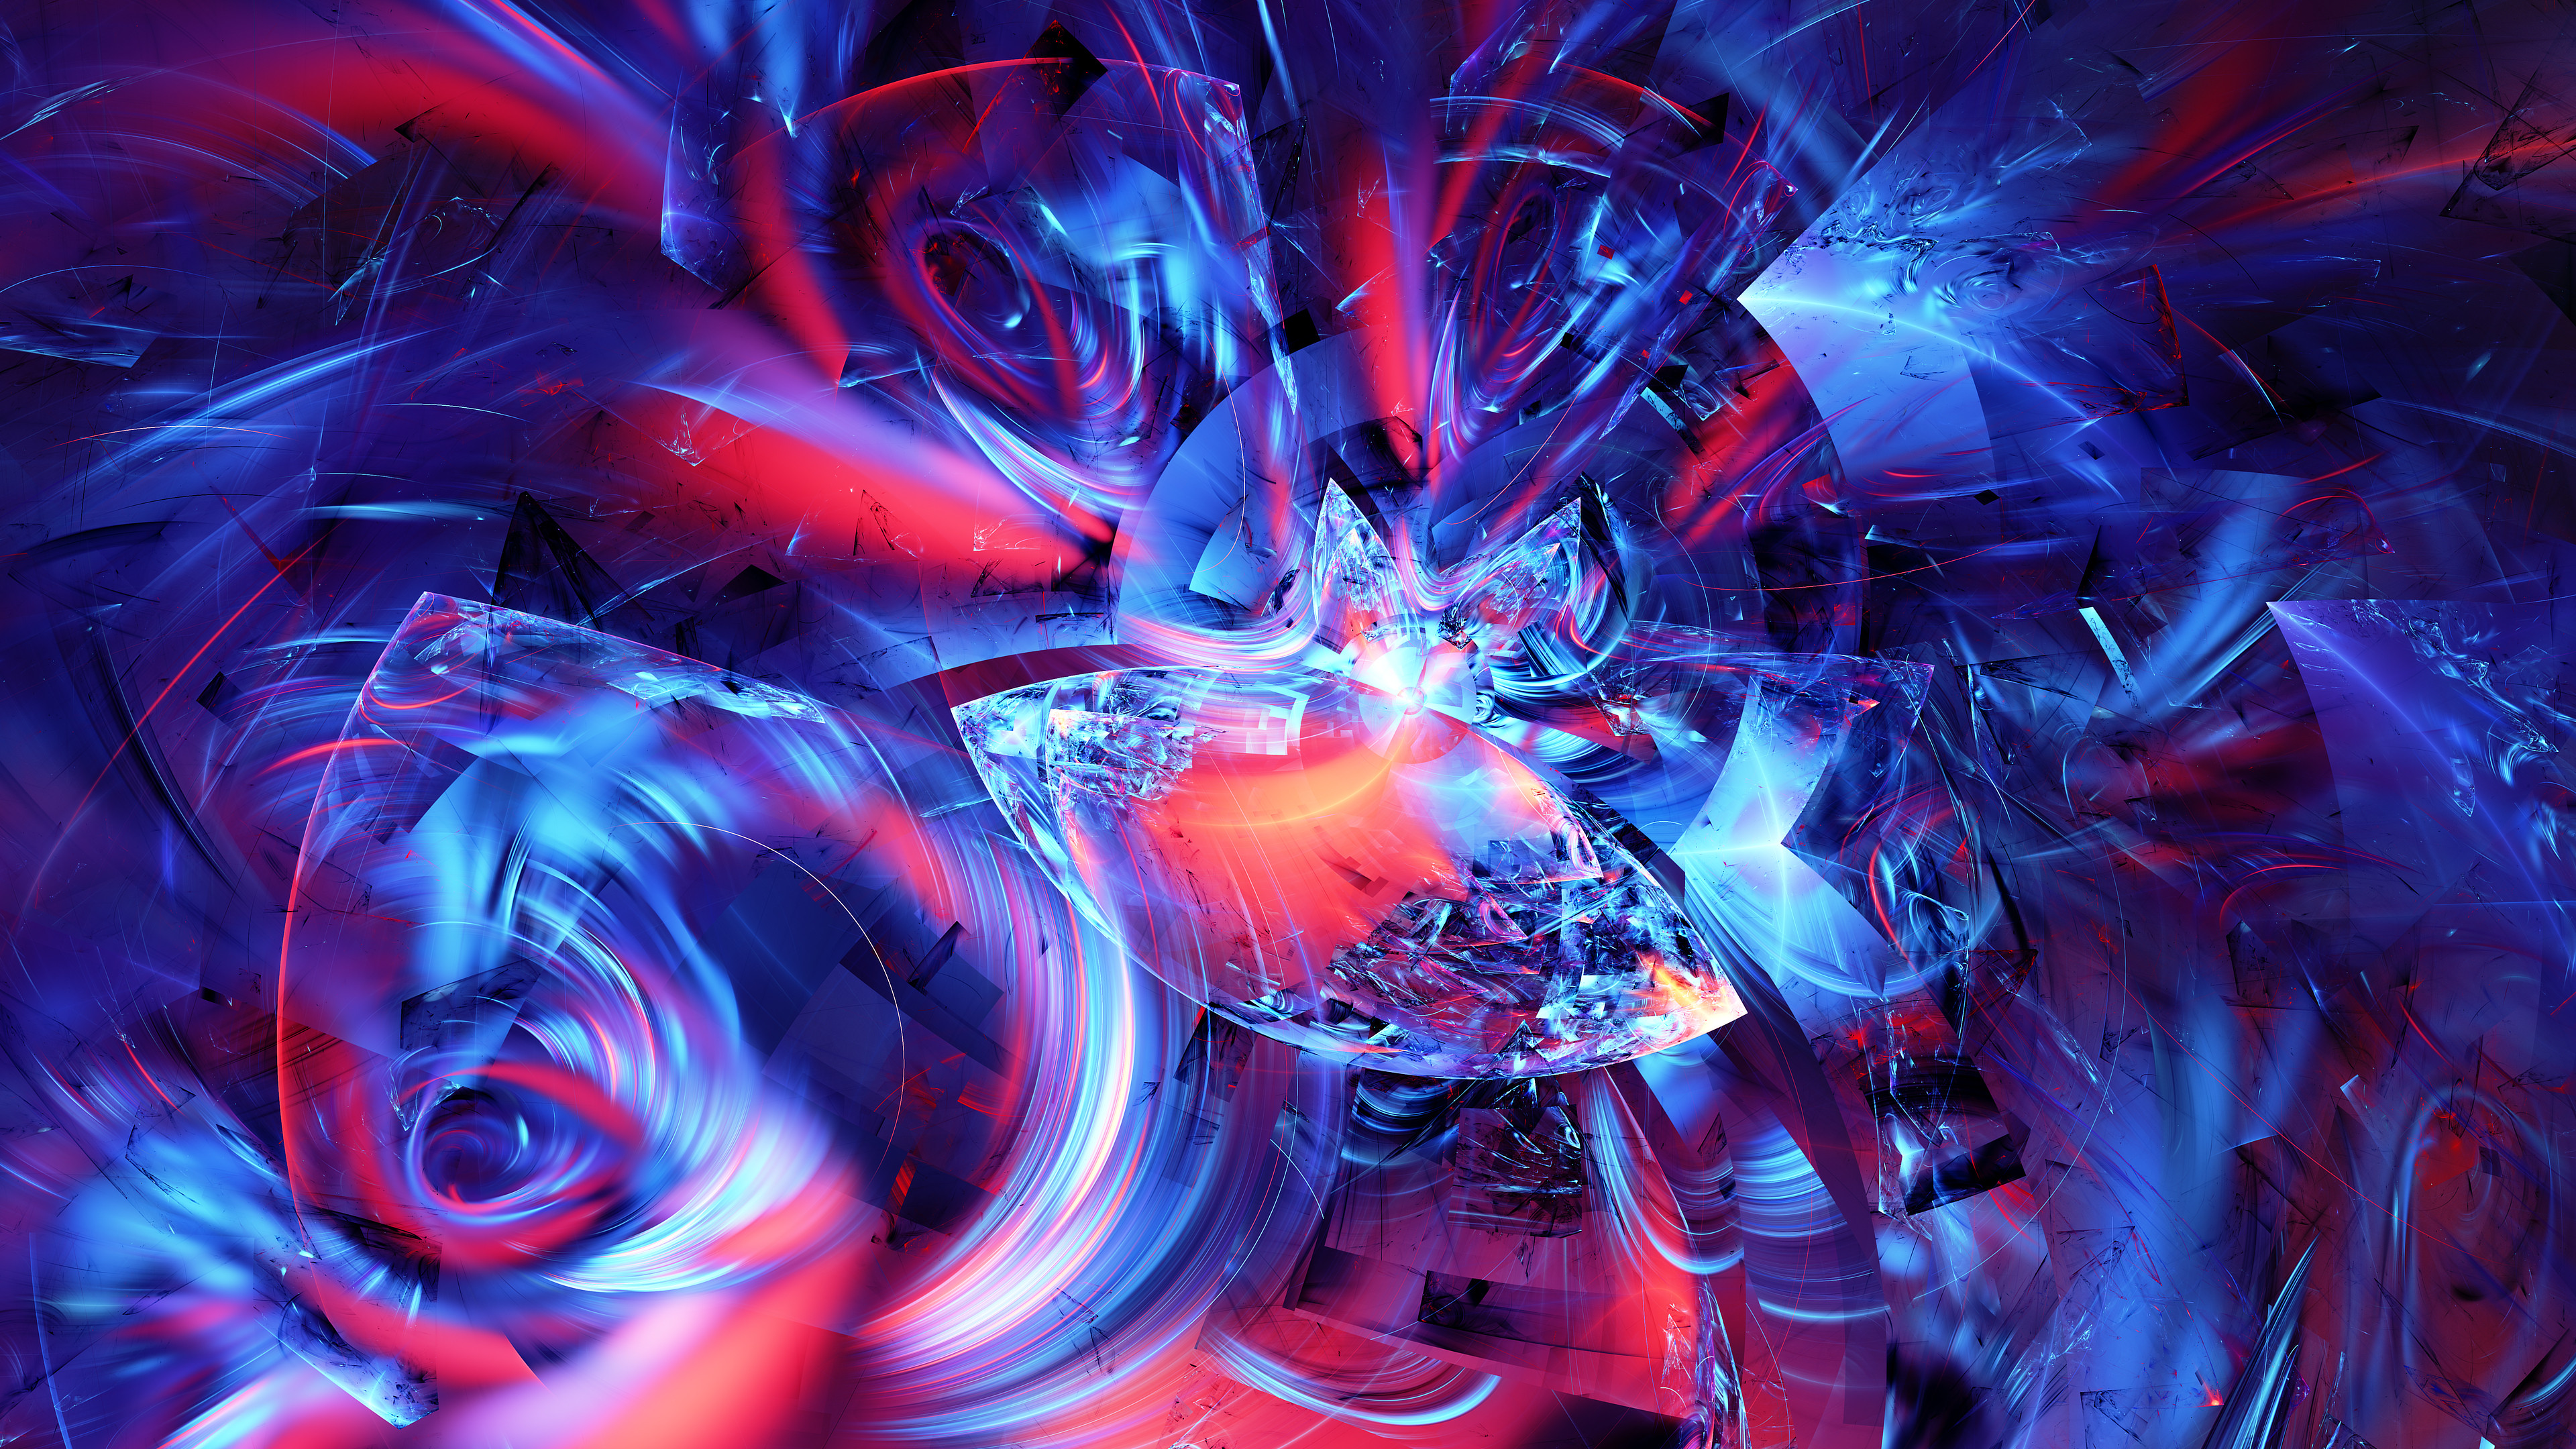 General 3840x2160 abstract chaotica fractal artwork technochroma